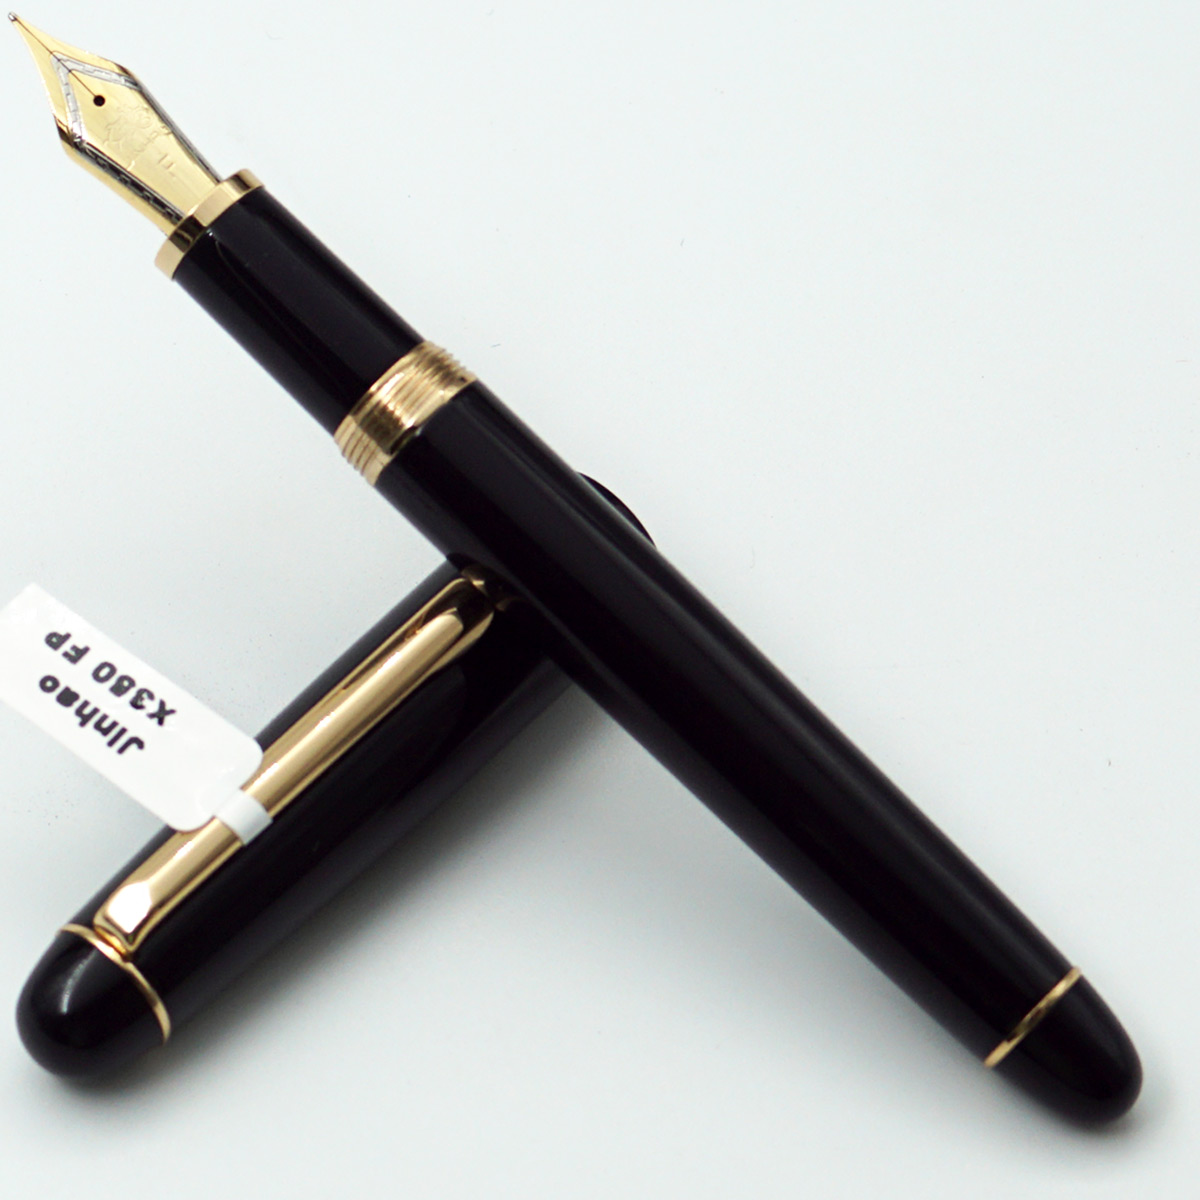 Jinhao 350 Glossy Black Color Body With 35 Fine Nib With Golden Clip Converter Type Fountain Pen SKU 24517